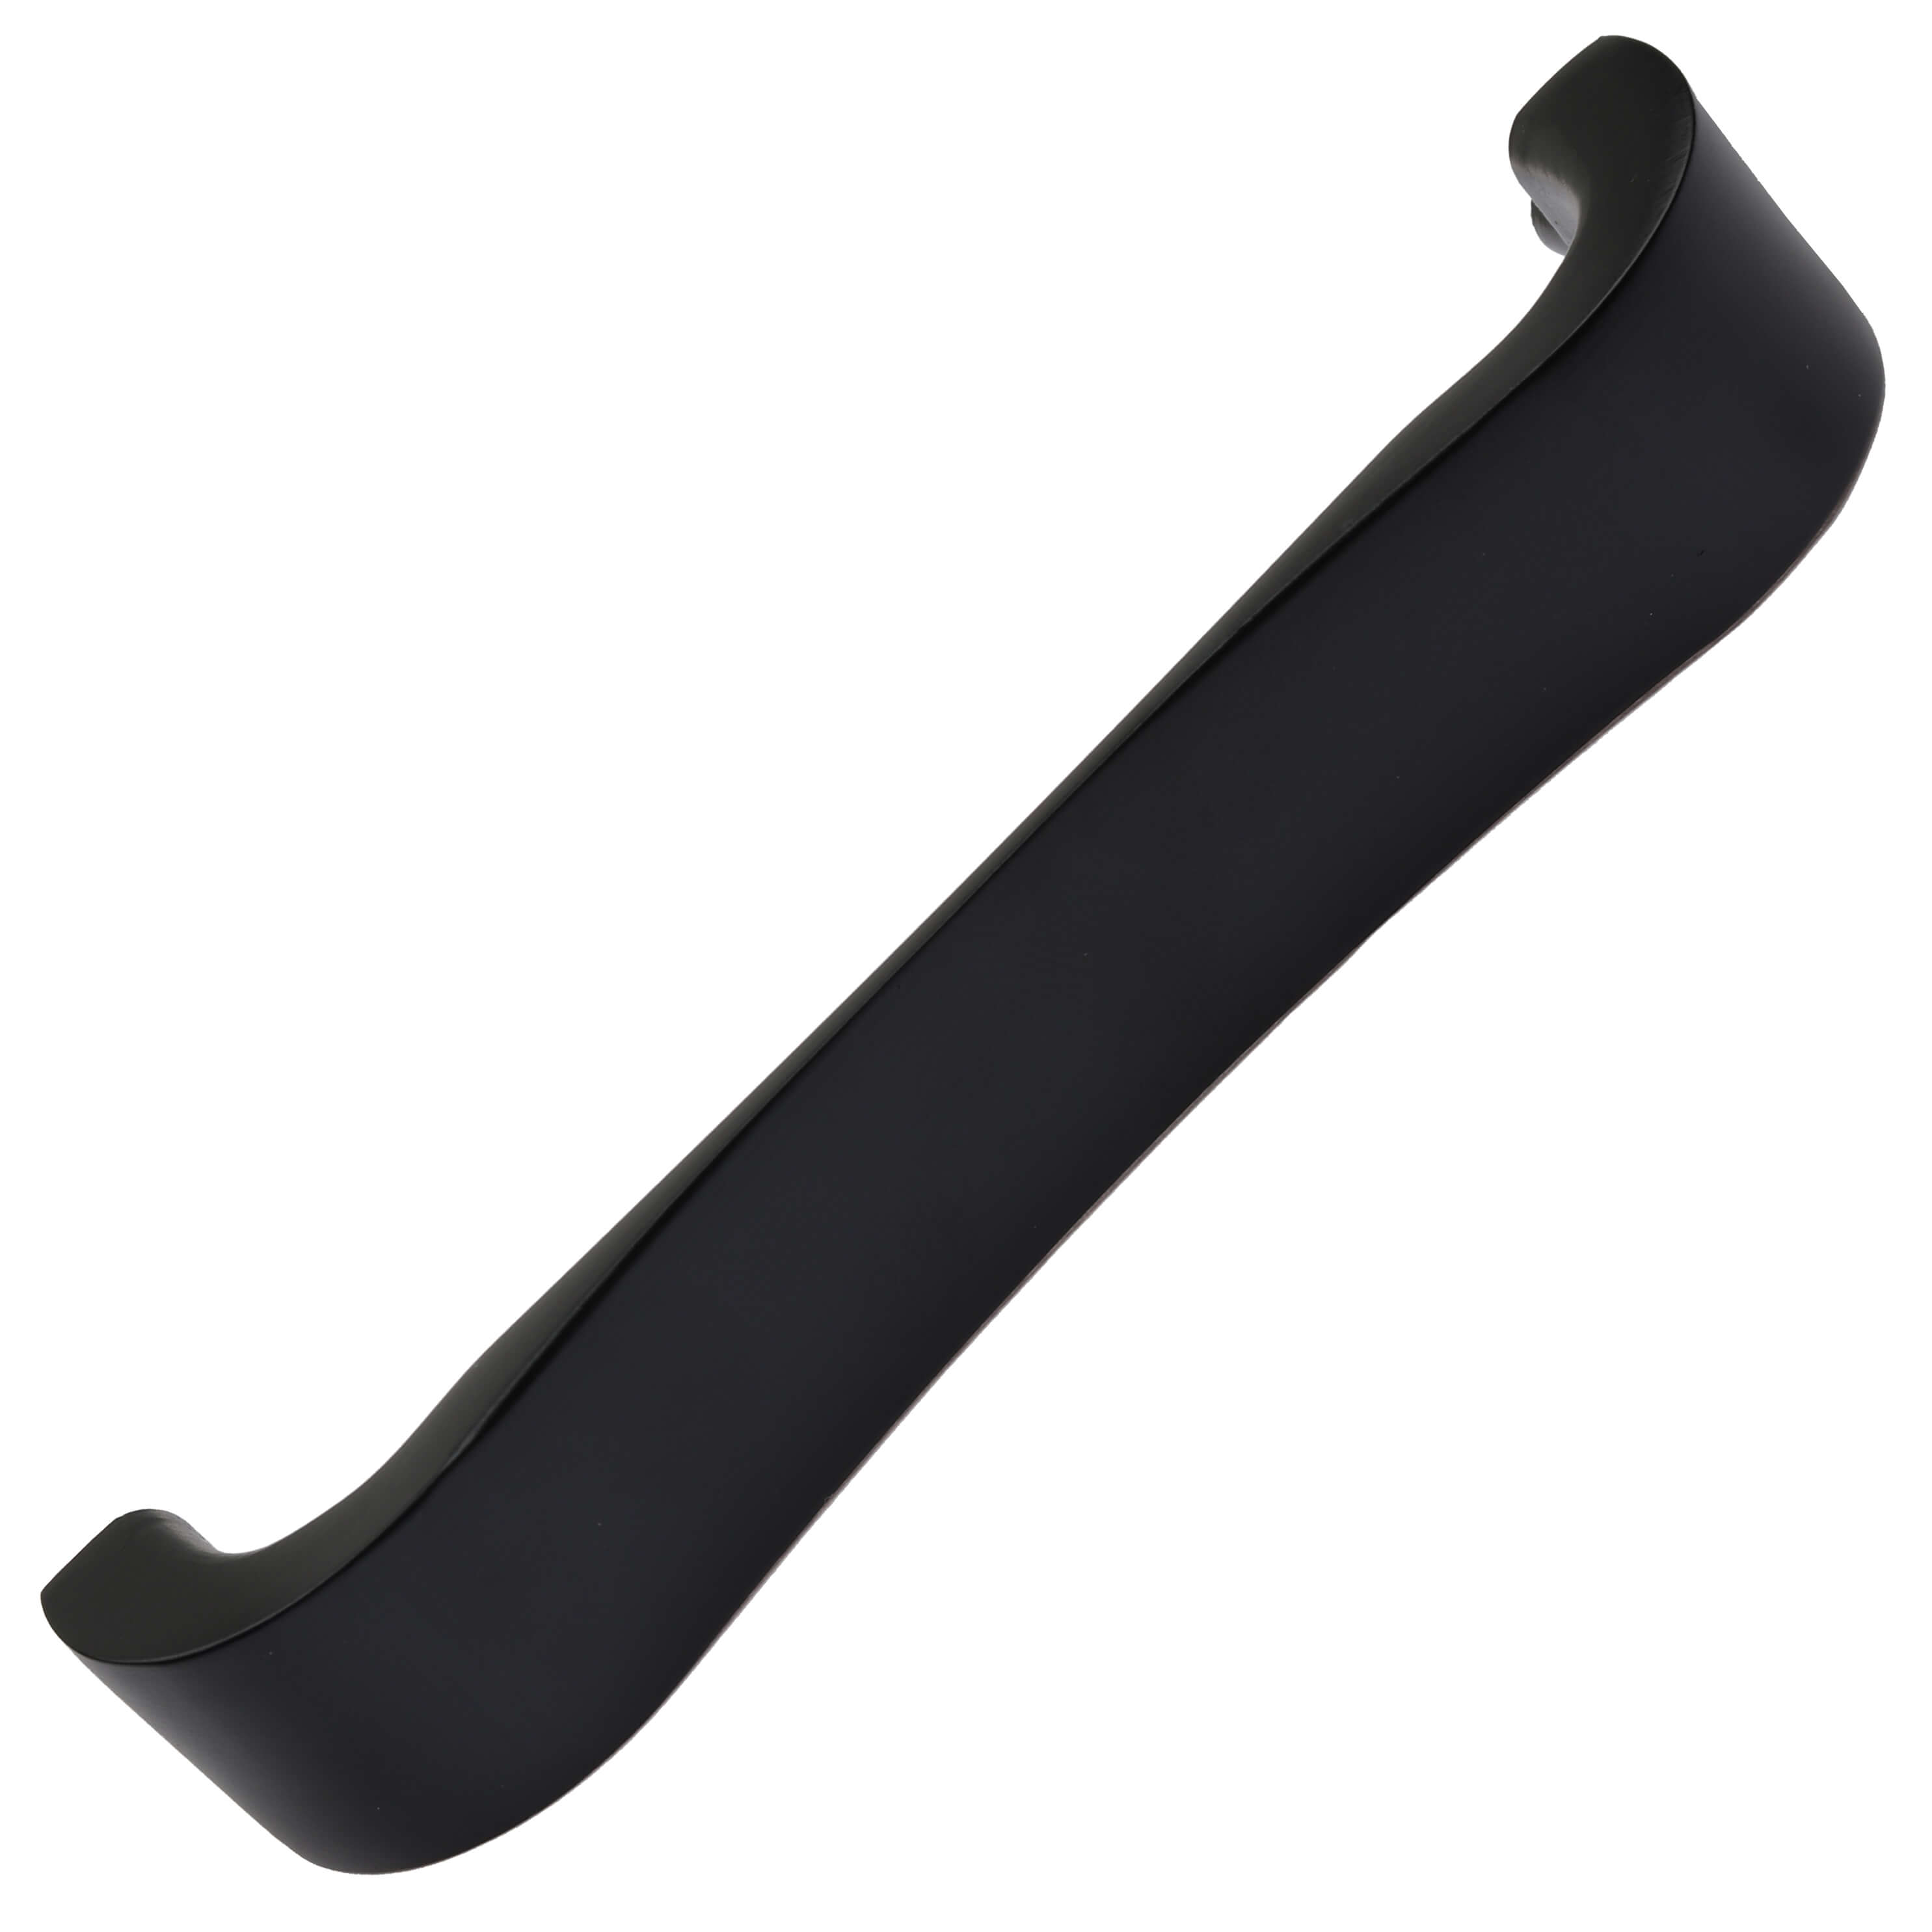 4-1/2 in. Center Smooth Curved Flat Cabinet Pull Handles, Matte Black, Pack of 5 - image 1 of 3